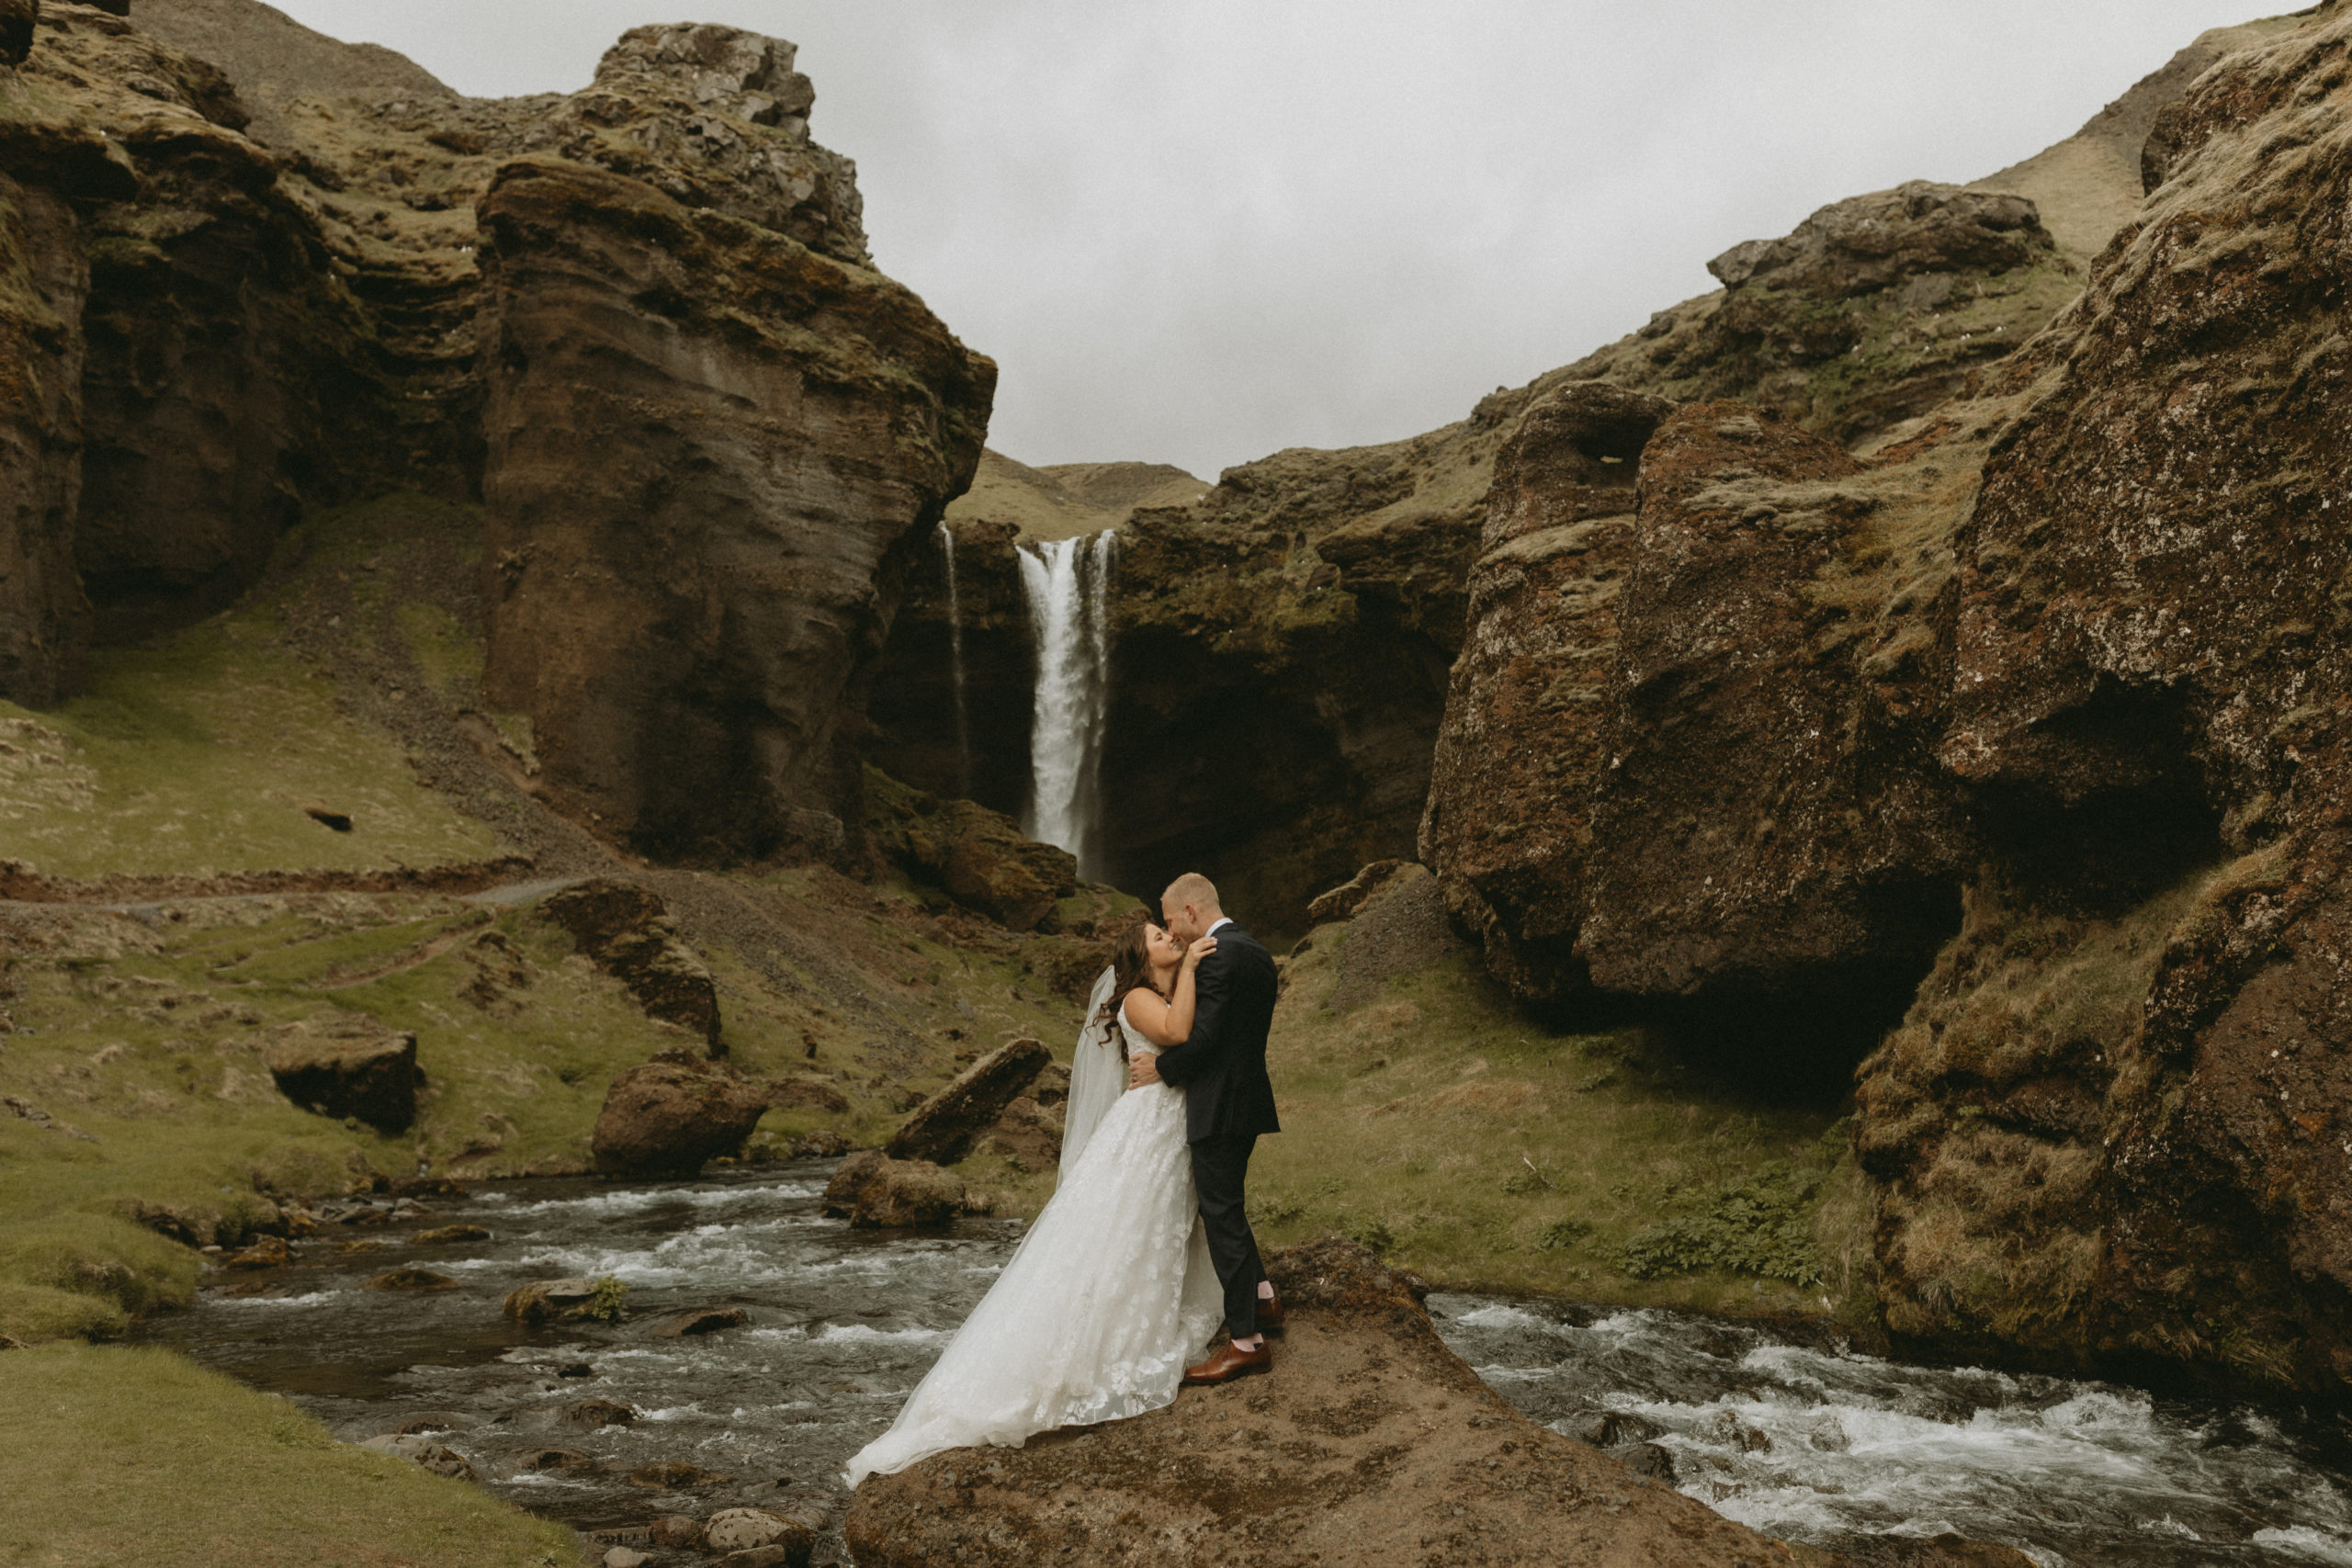 Bride and groom standing on rock in river with an iceland waterfall behind them.